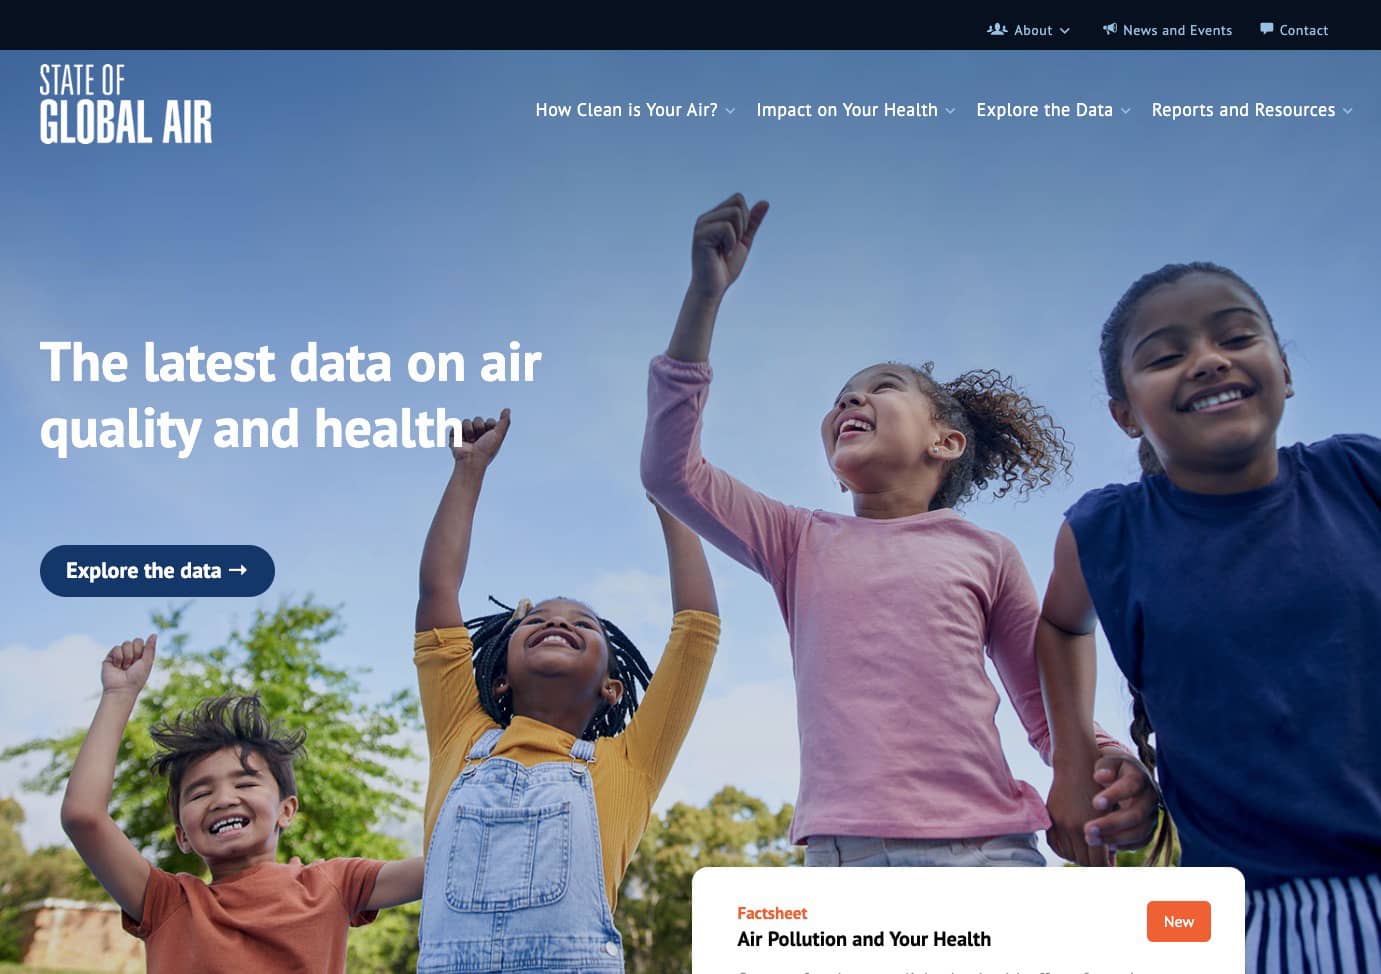 Screen capture from State of Global Air home page showing smiling children